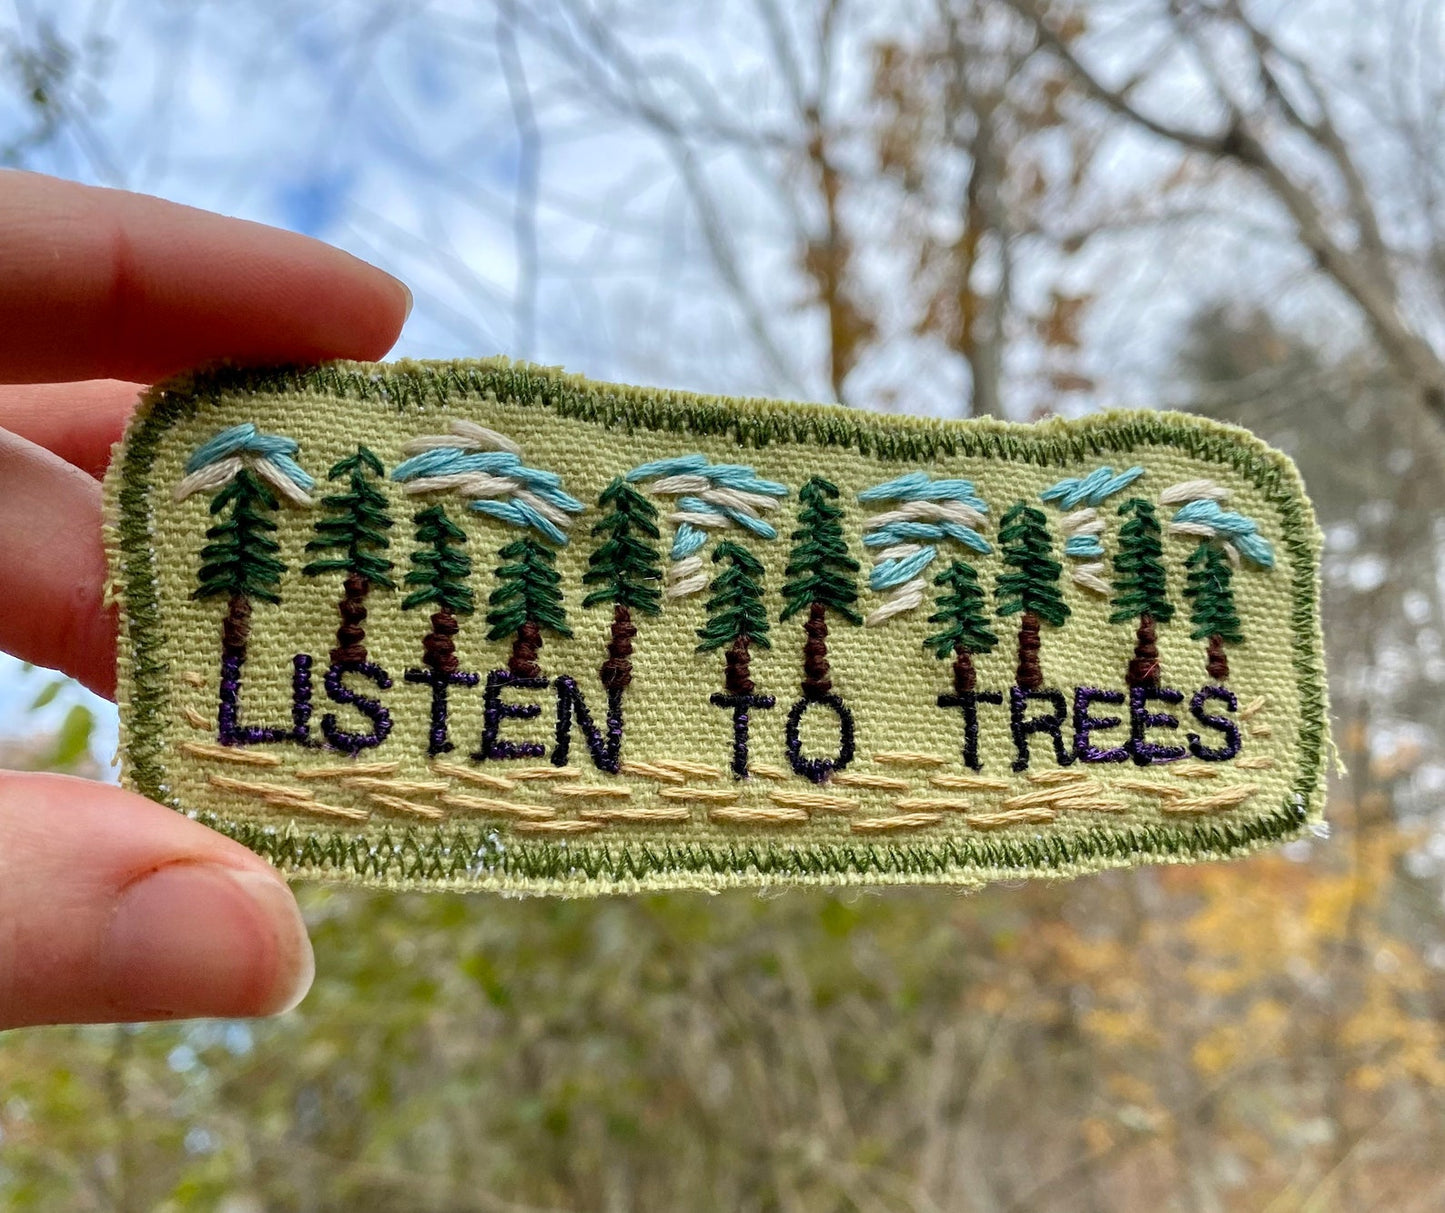 Listen to Trees - Handmade Embroidered Canvas Patch